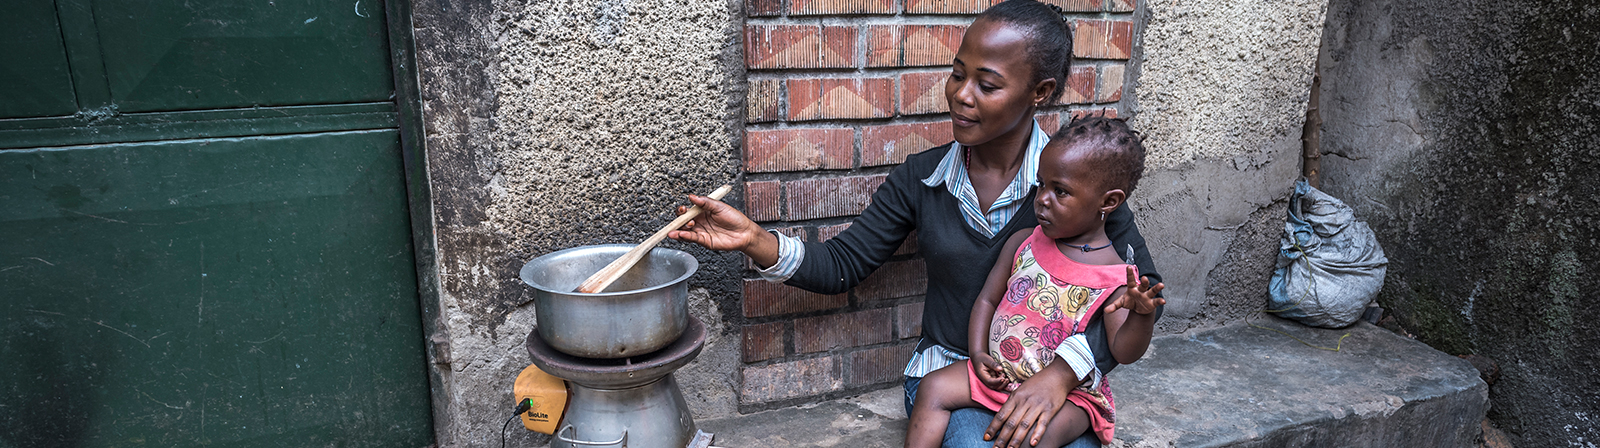 woman and child sitting outside their home cooking